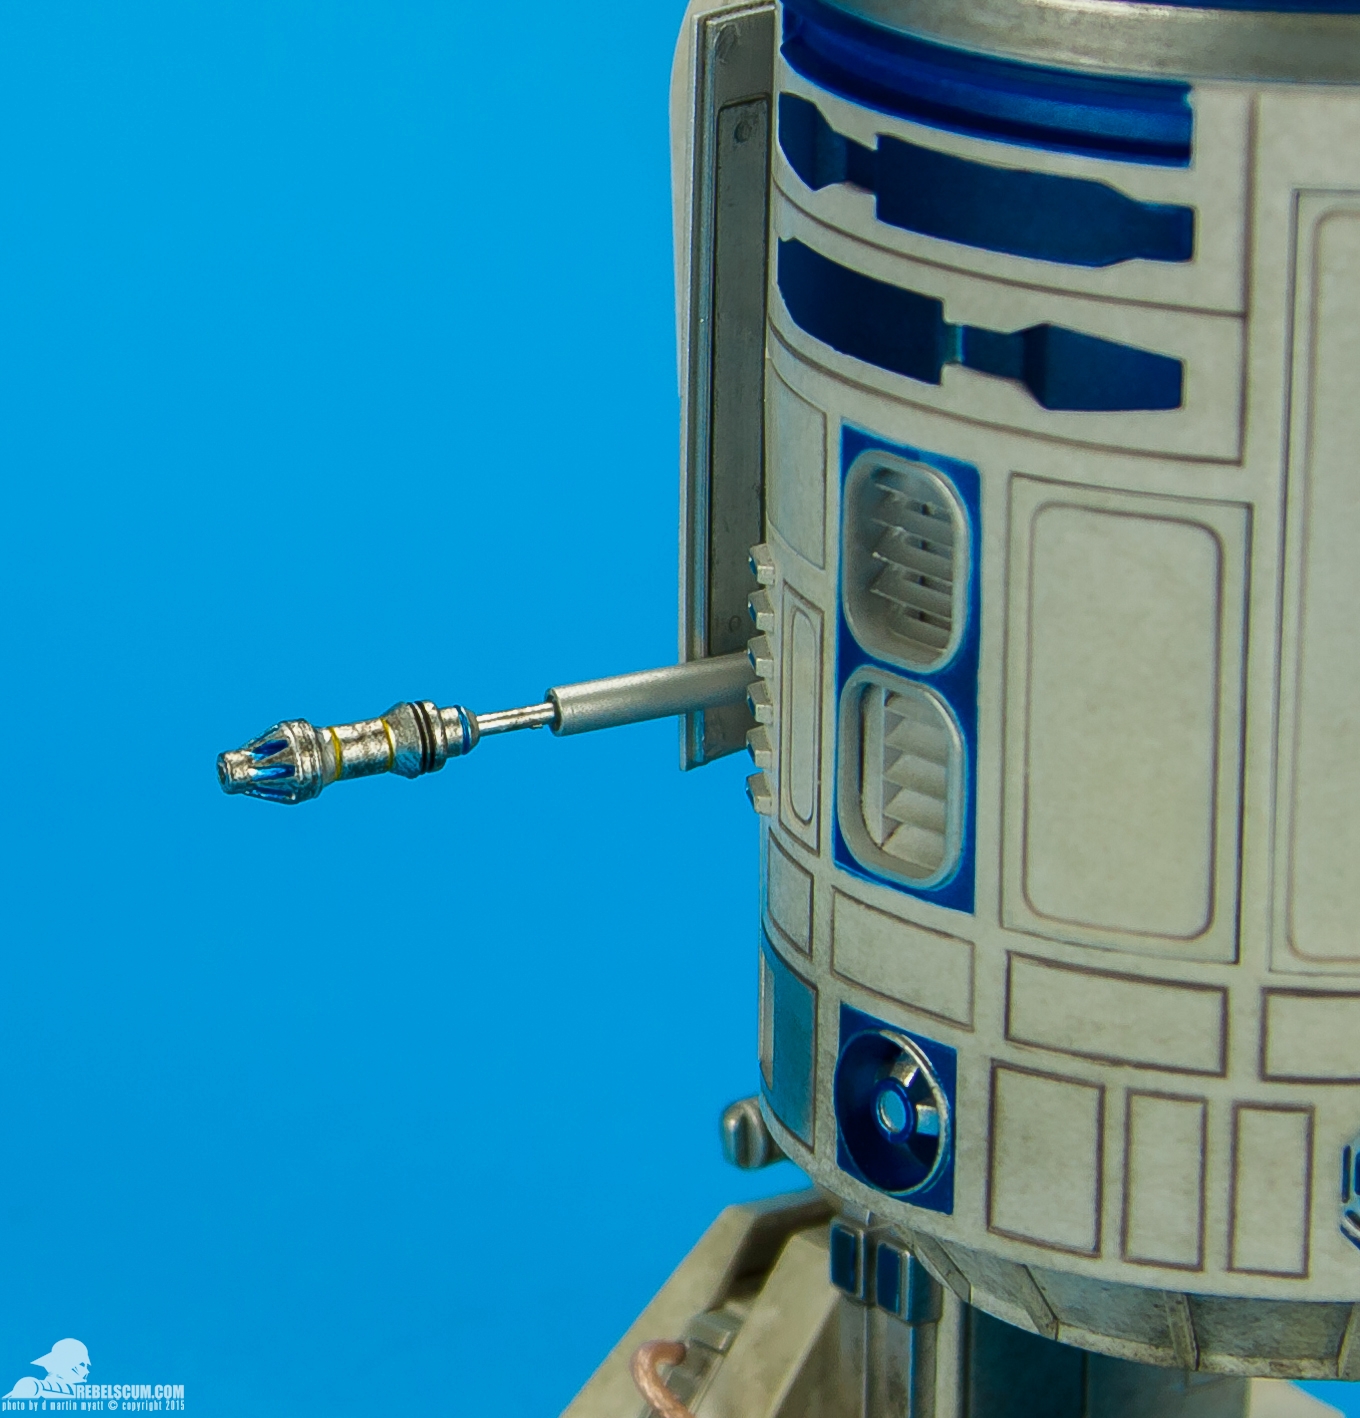 Sideshow-Collectibles-R2-D2-Sixth-Scale-Figure-Review-040.jpg